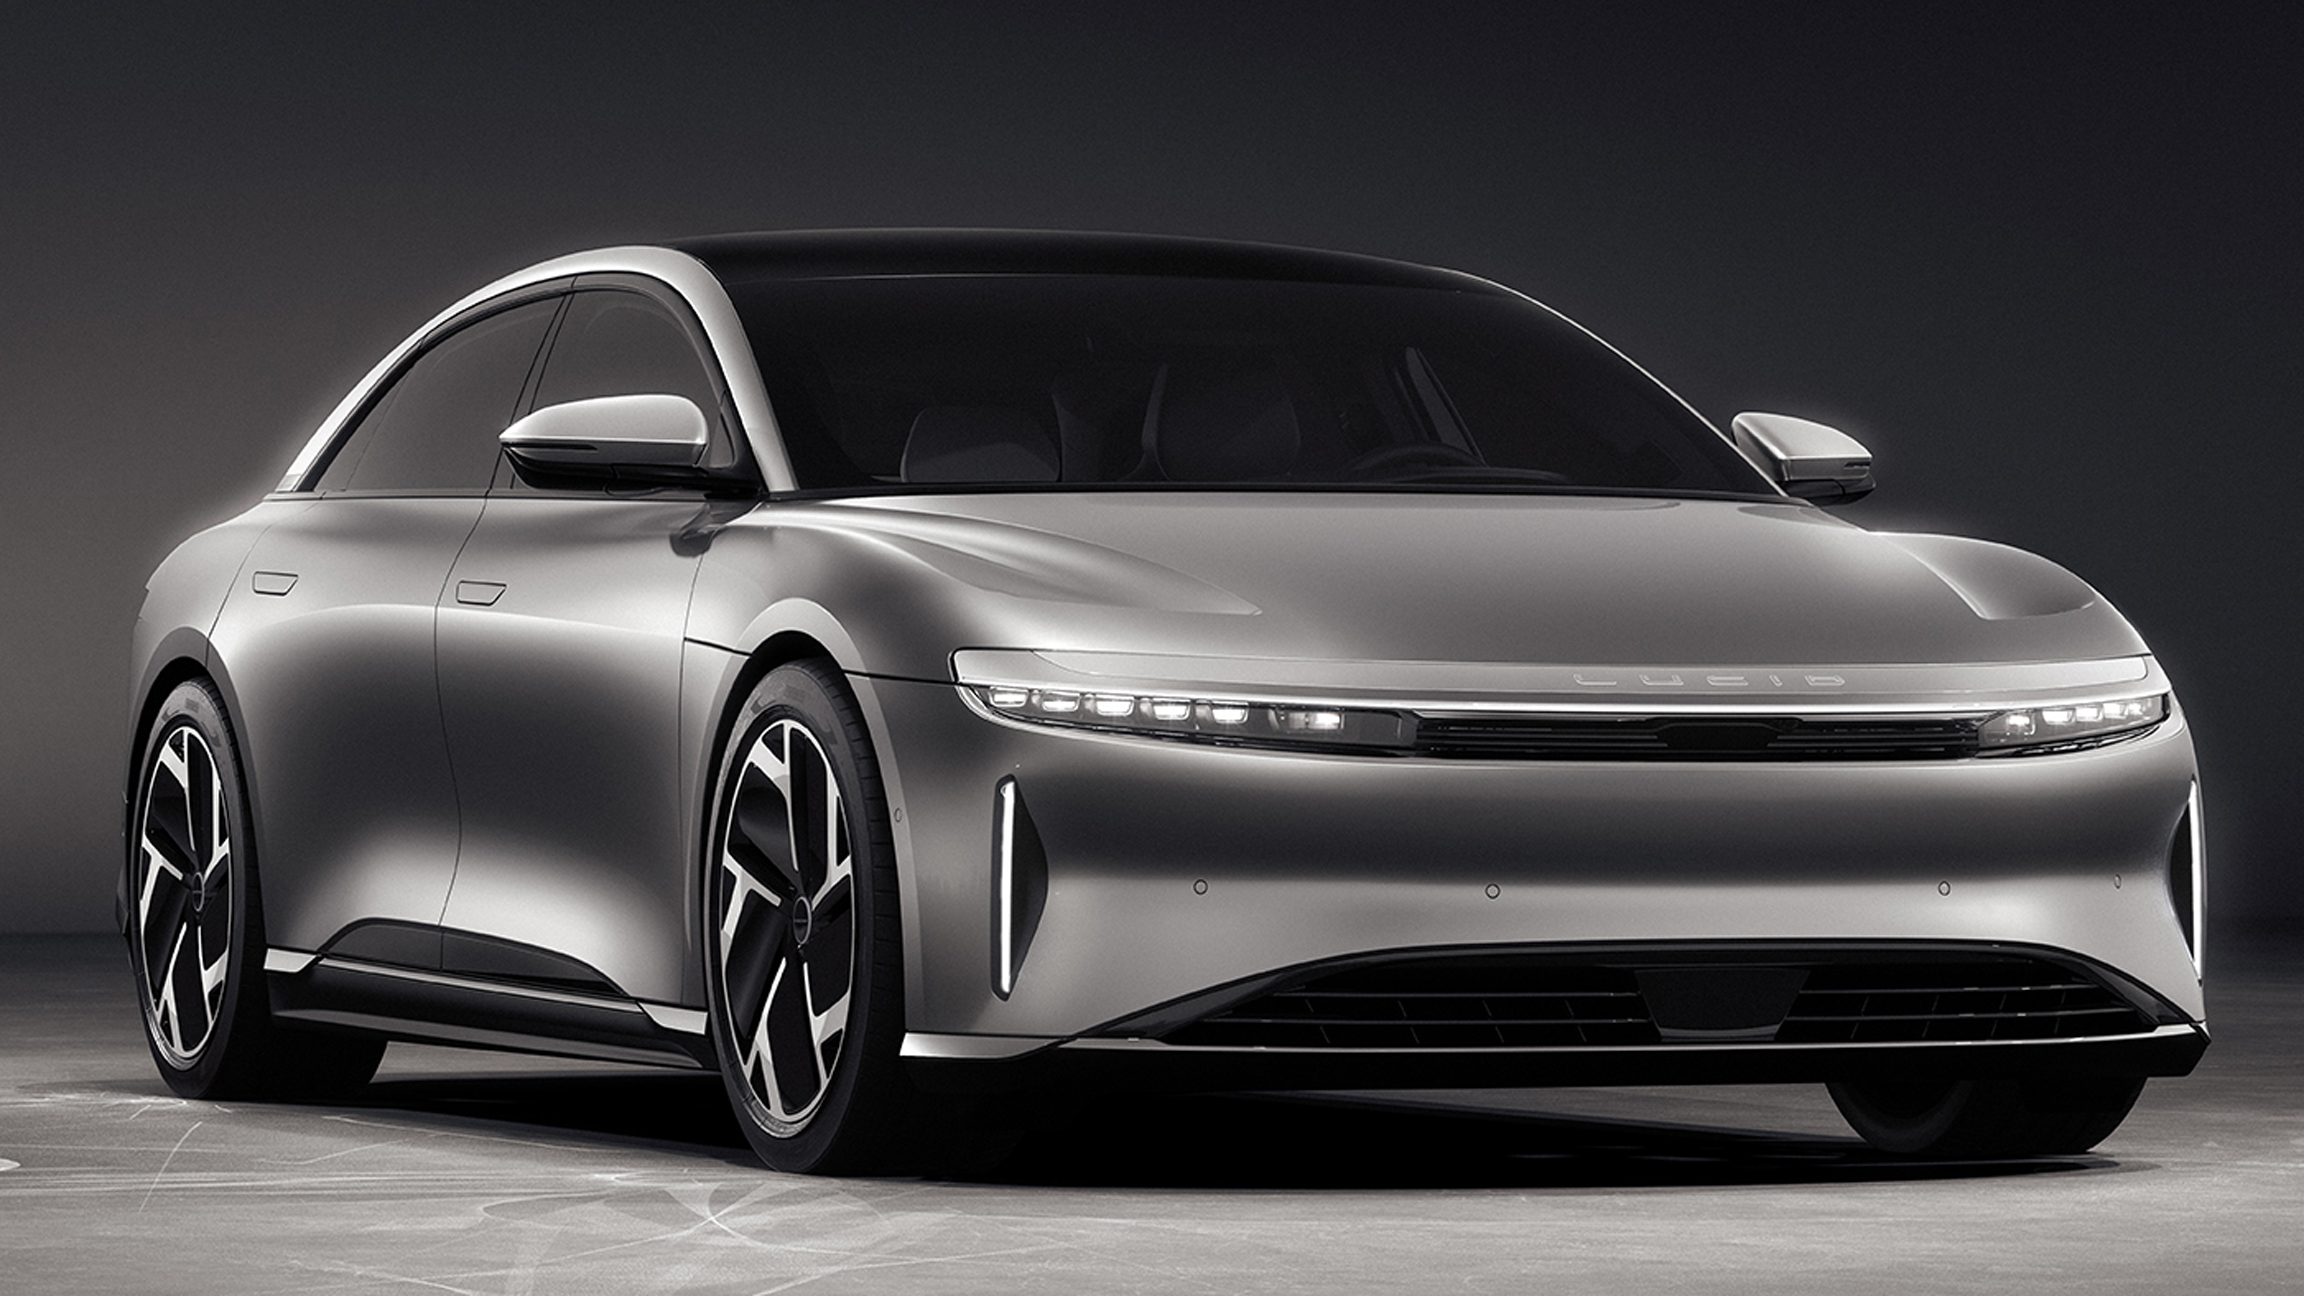 The Lucid Air electric car will start at 77,400 with 406mile range